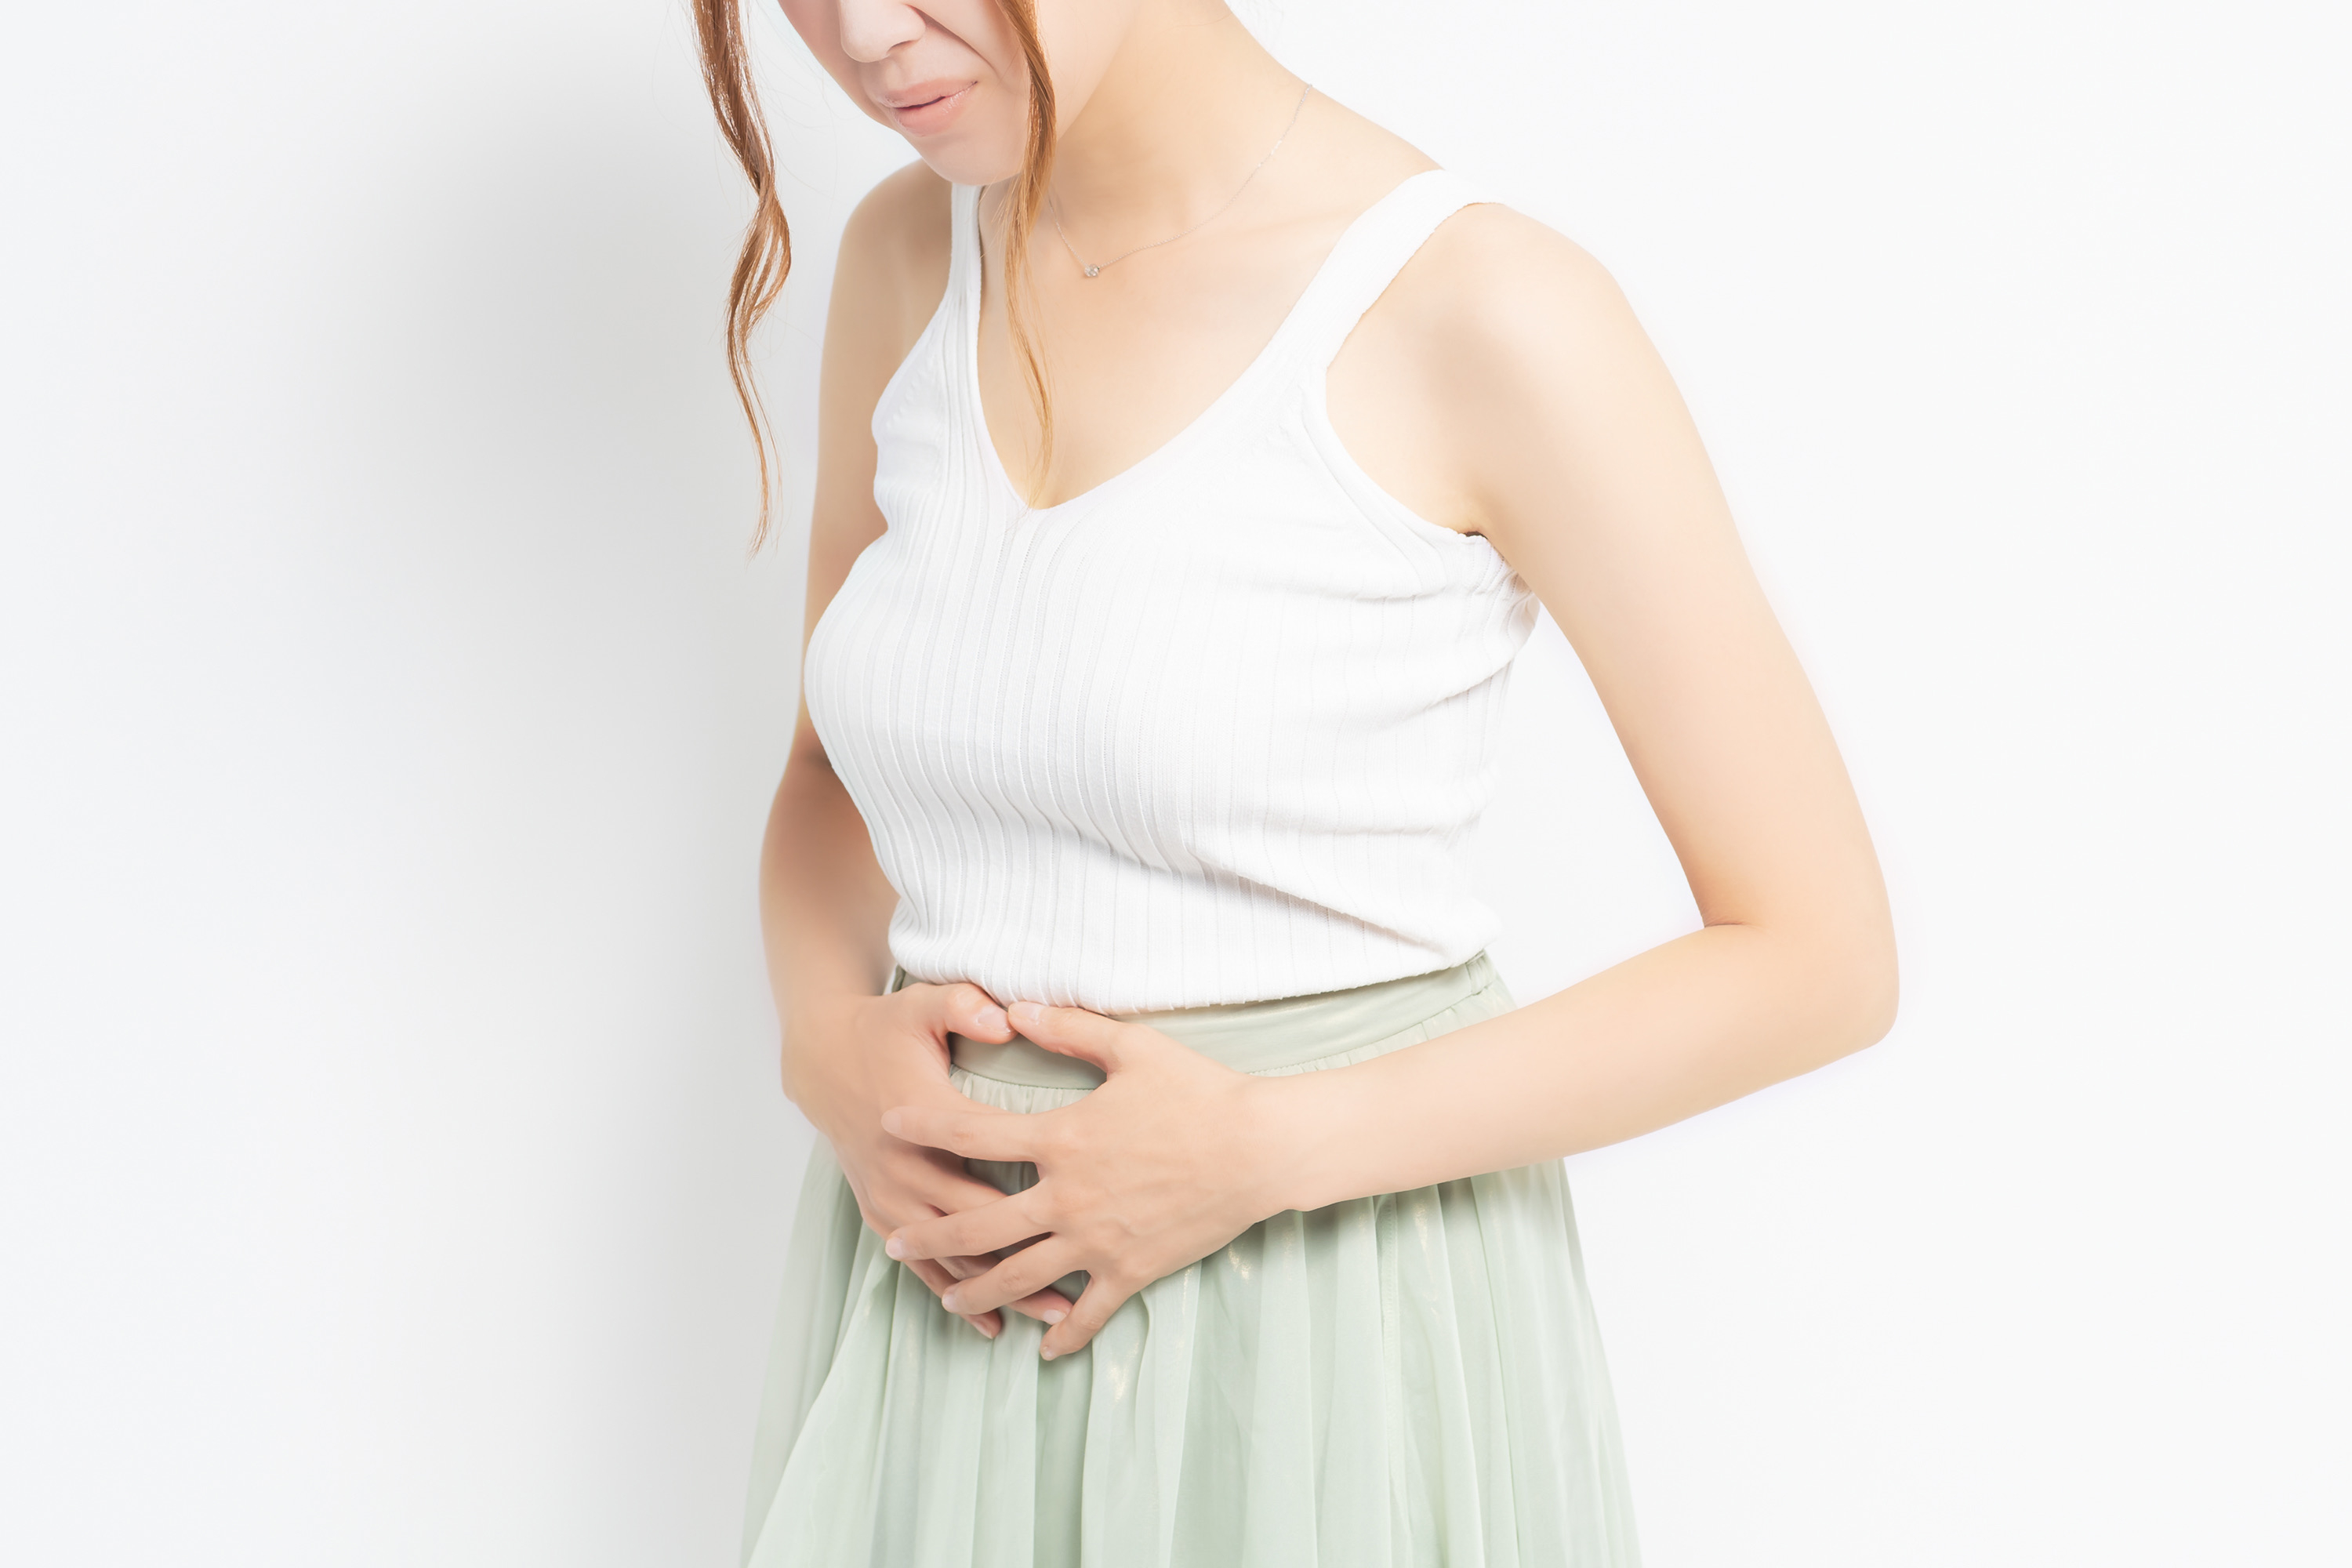 Fibroids, Cysts and Everything in Between